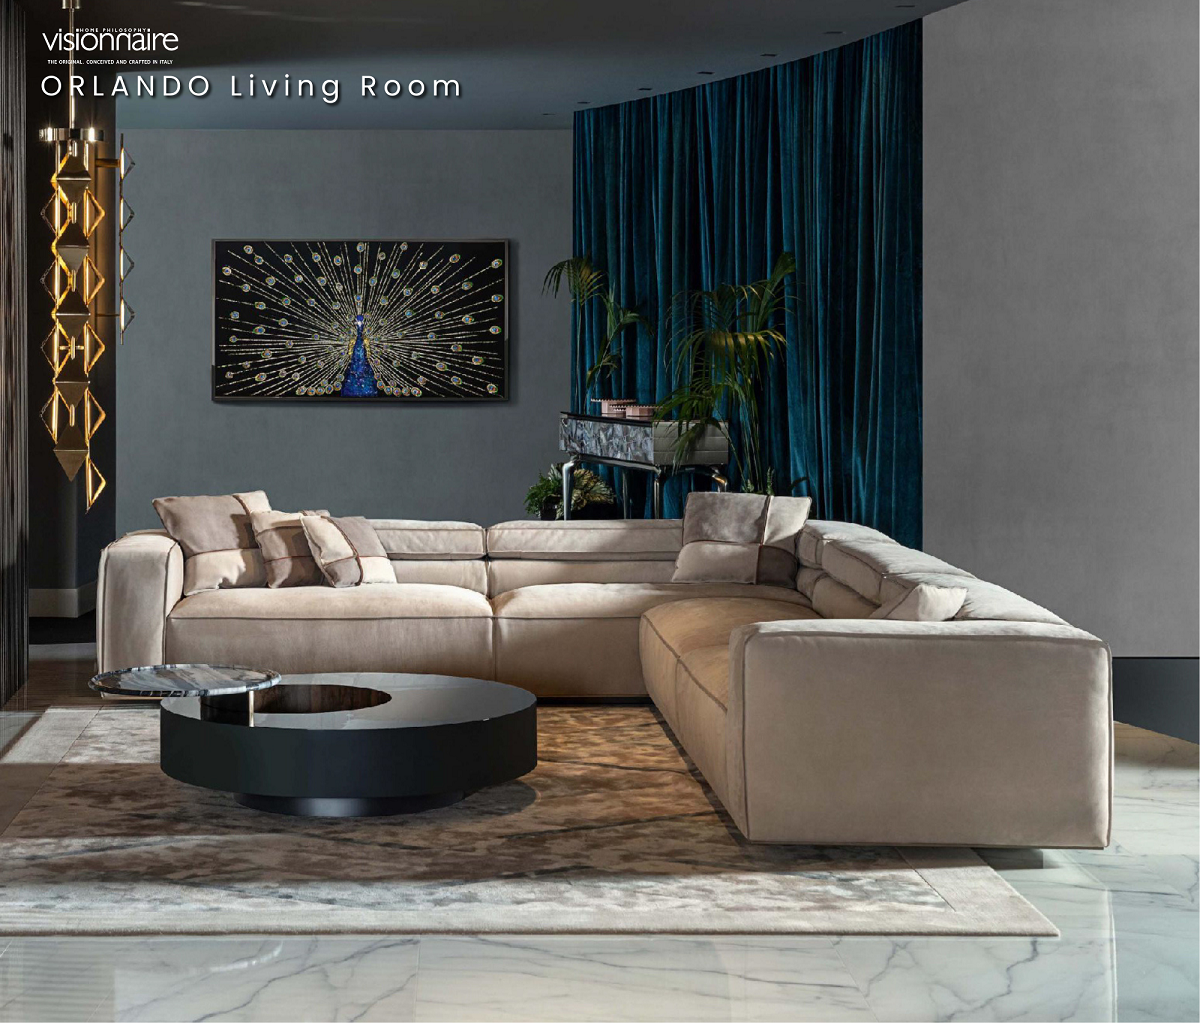 Inspire by the relish in exceptional design and refined craftsmanship by Bentley Home, Versace Home, Visionnaire & Turri